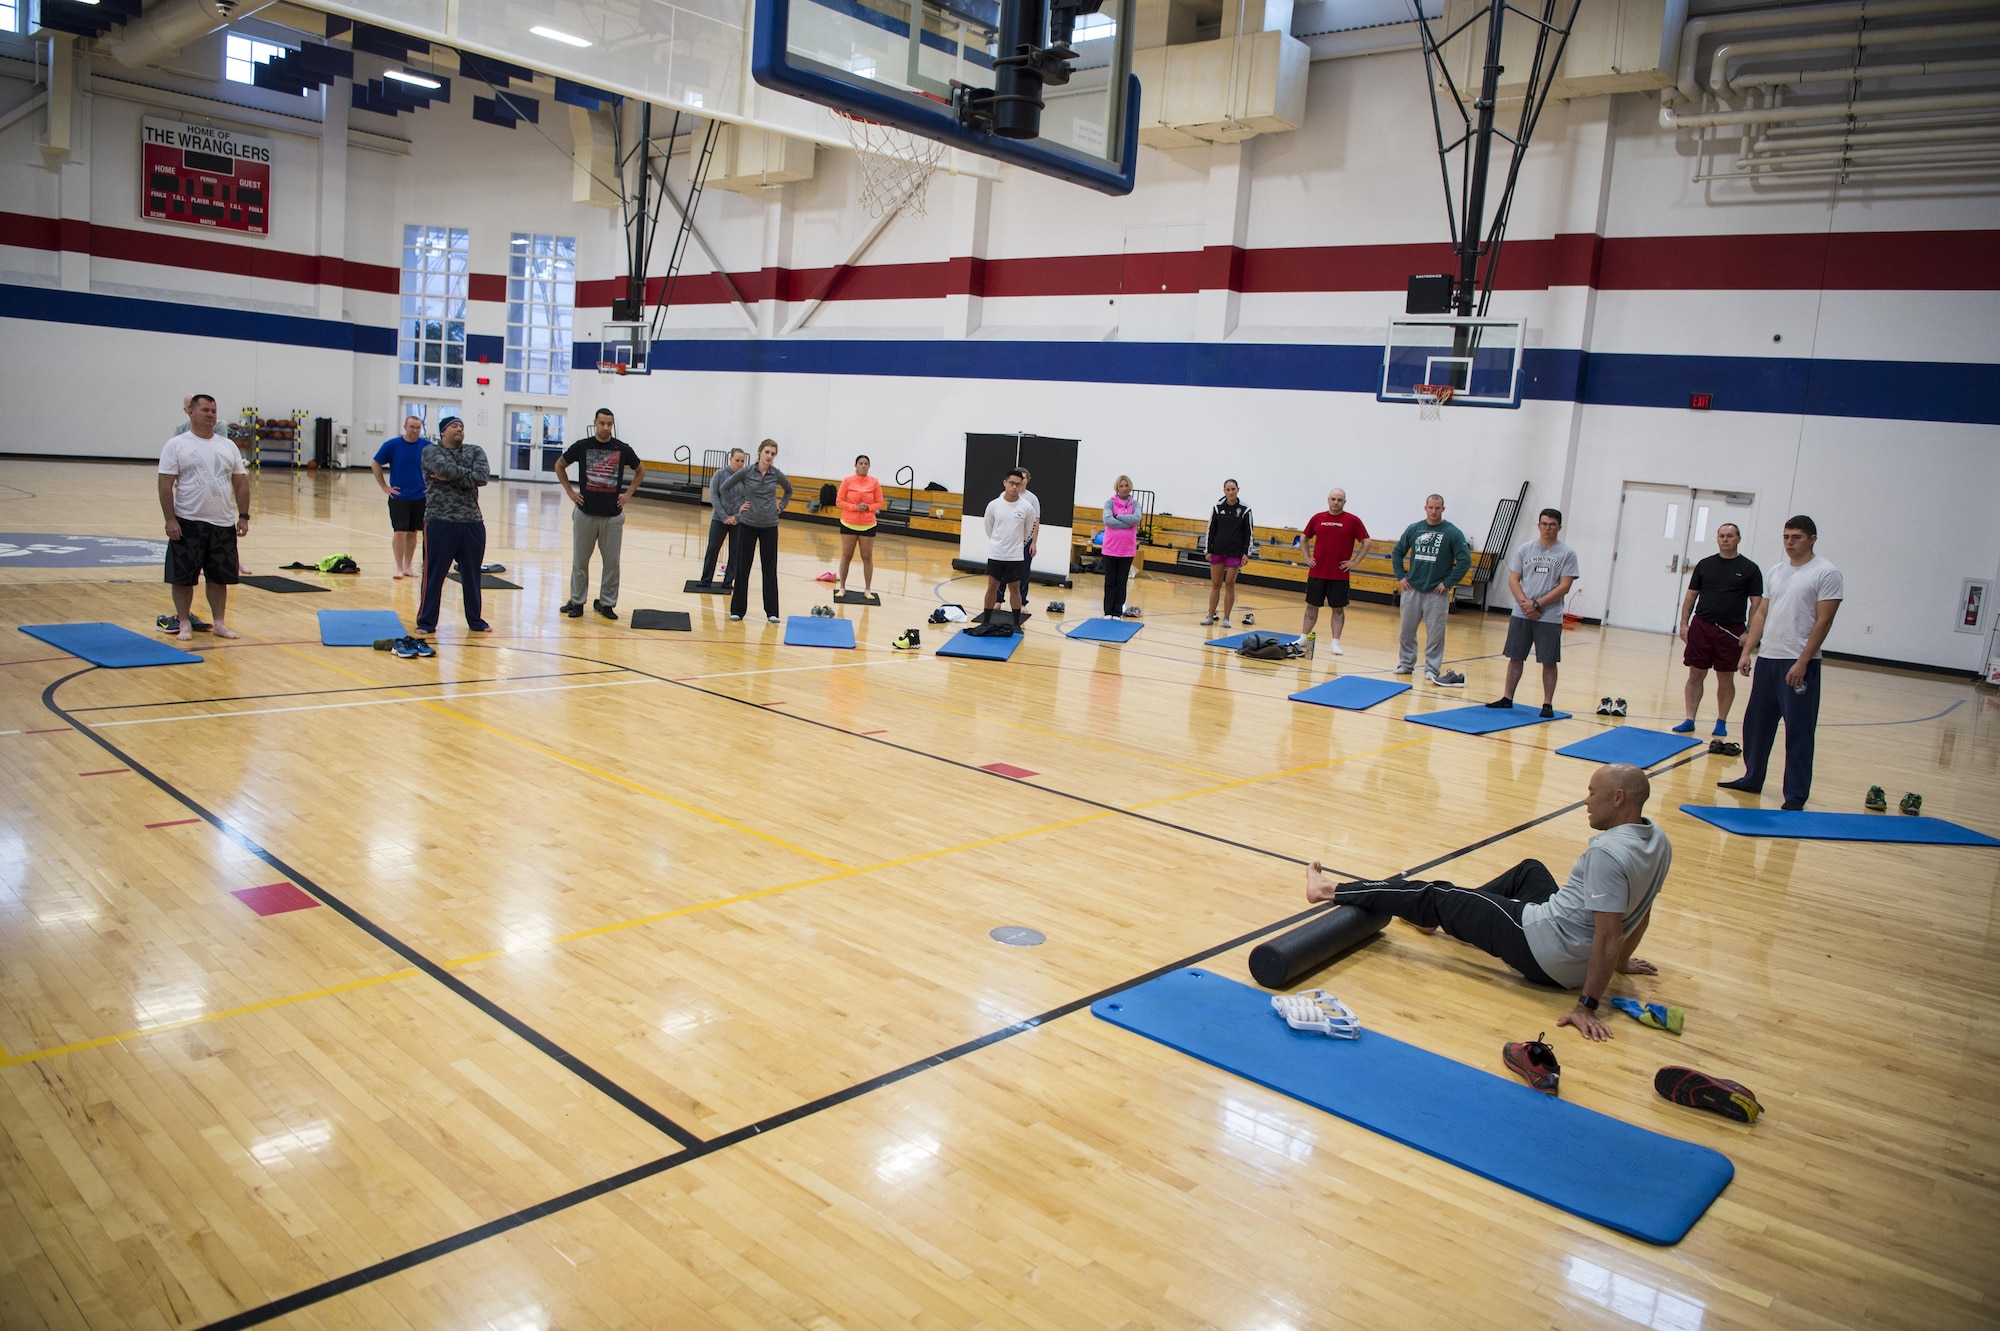 Ian Adamson, president of Healthy Running, uses a foam roller to demonstrate ankle and calf stretching during a natural running form clinic at F.E. Warren Air Force Base, Wyo., Oct. 6, 2016. Adamson has a master’s degree in sports medicine and uses his experience and knowledge to teach about healthy living and how to improve running. “I think courses like this bring a different perspective on fitness compared to what Airmen continue to hear from base health services,” said Alison Morrell, 90th Medical Operations Squadron health promotion coordinator. “Adamson is a professional who has won multiple gold medals and broken world records. He shows that he knows what he is talking about through his education and experience.” (U.S. Air Force photo by Staff Sgt. Christopher Ruano)